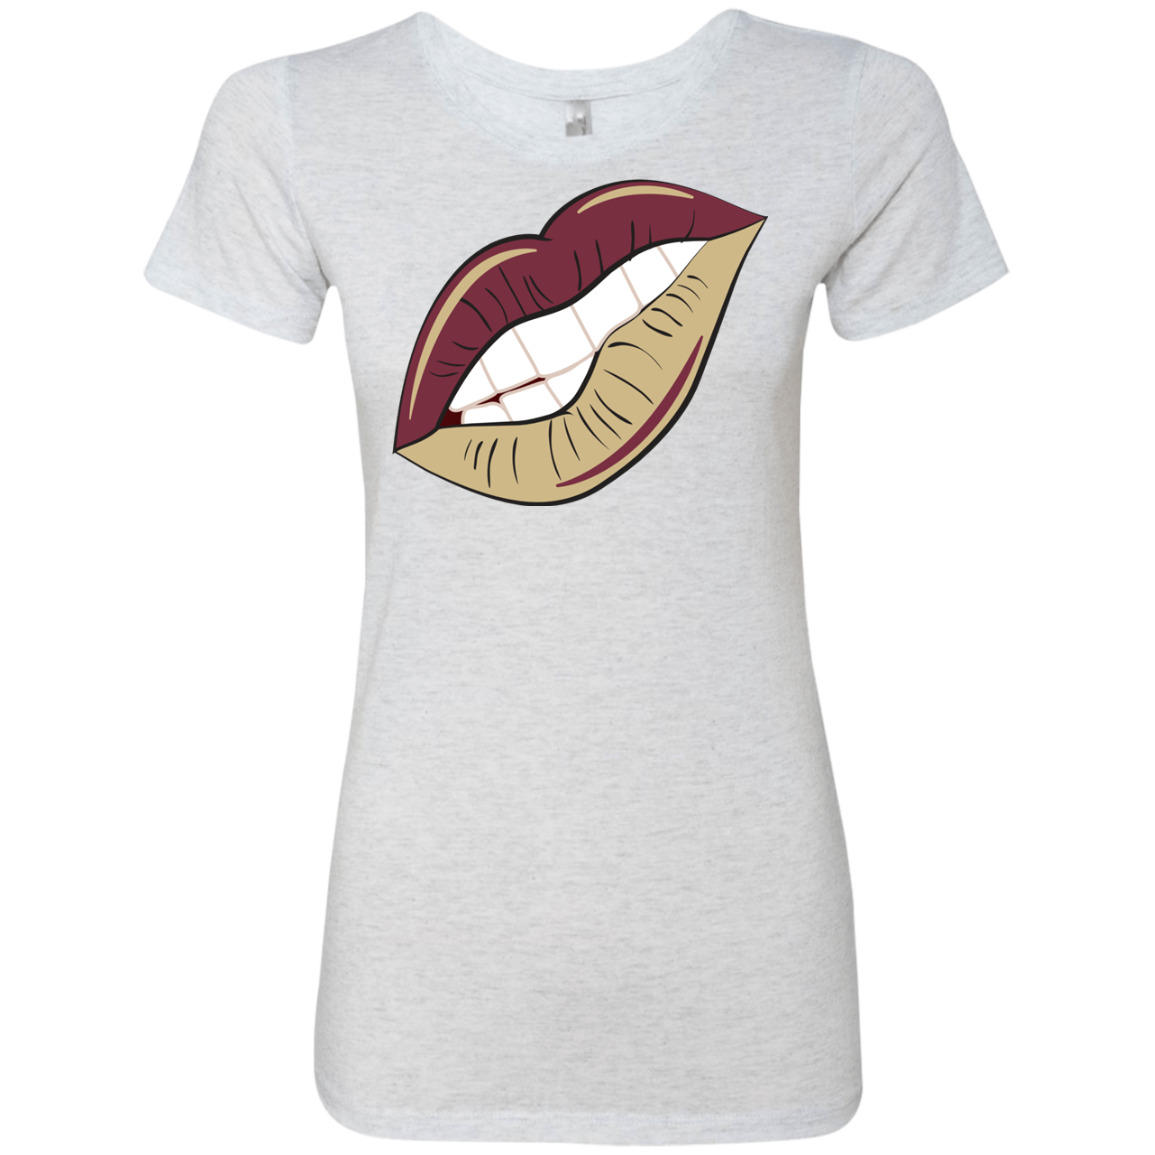 Garnet and Gold Womens Extra Slim Fit